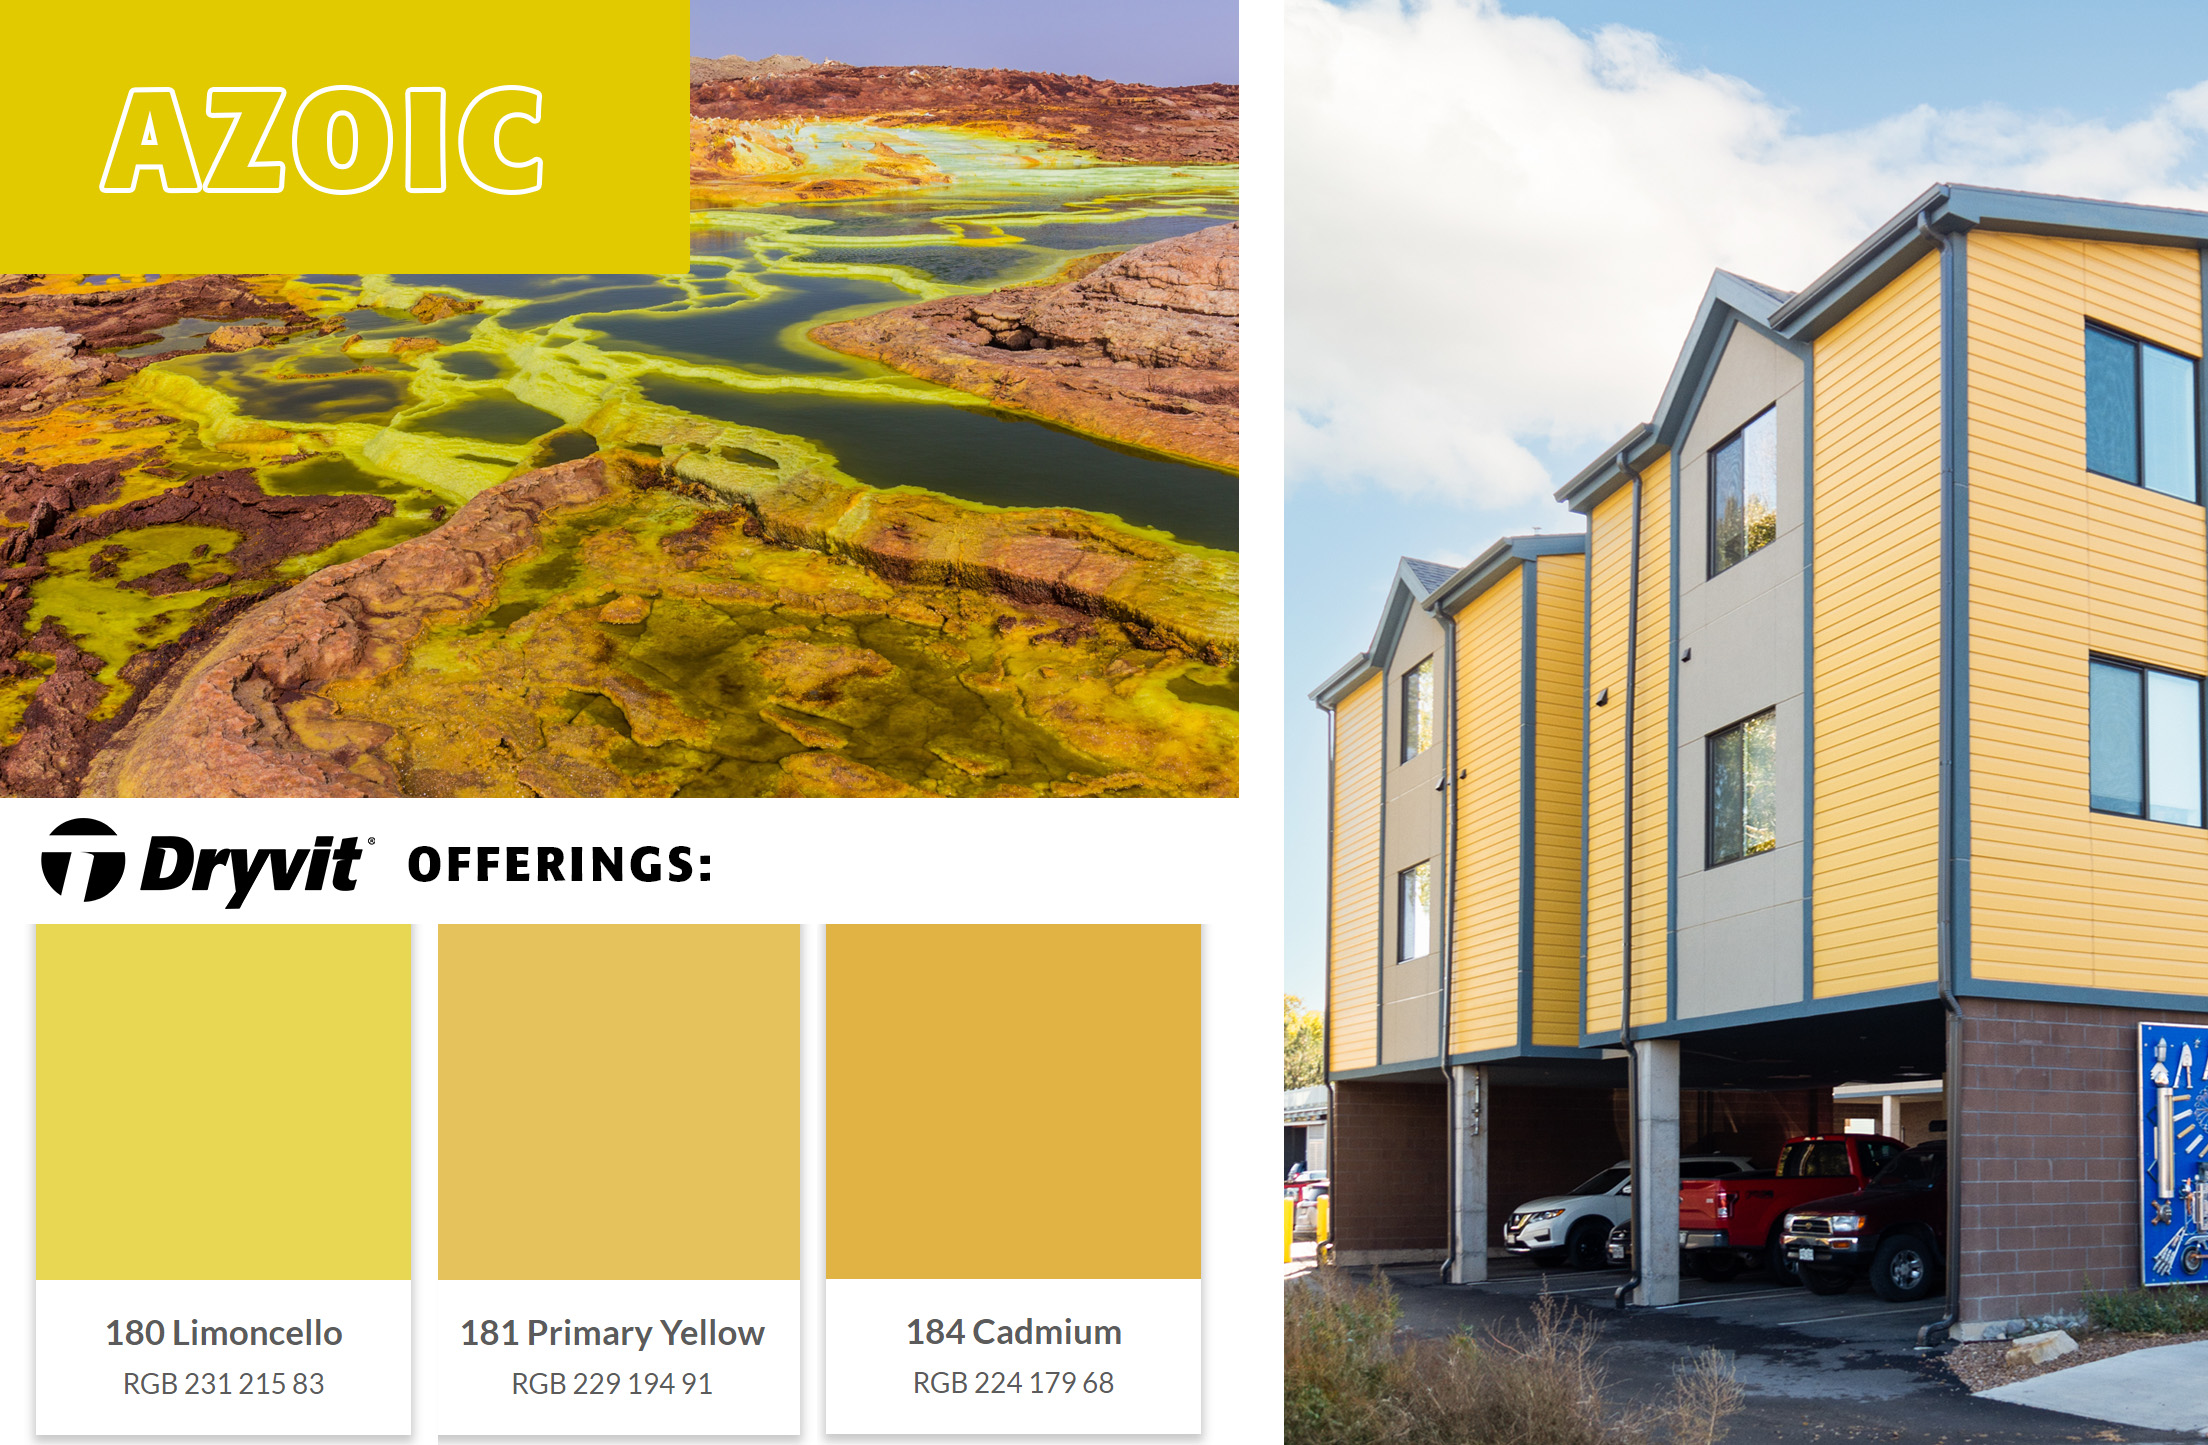 a collage of images showing an energetic yellow color. Photos include a river delta and a modern affordable housing building with Dryvit exterior paneling in an inviting yellow 